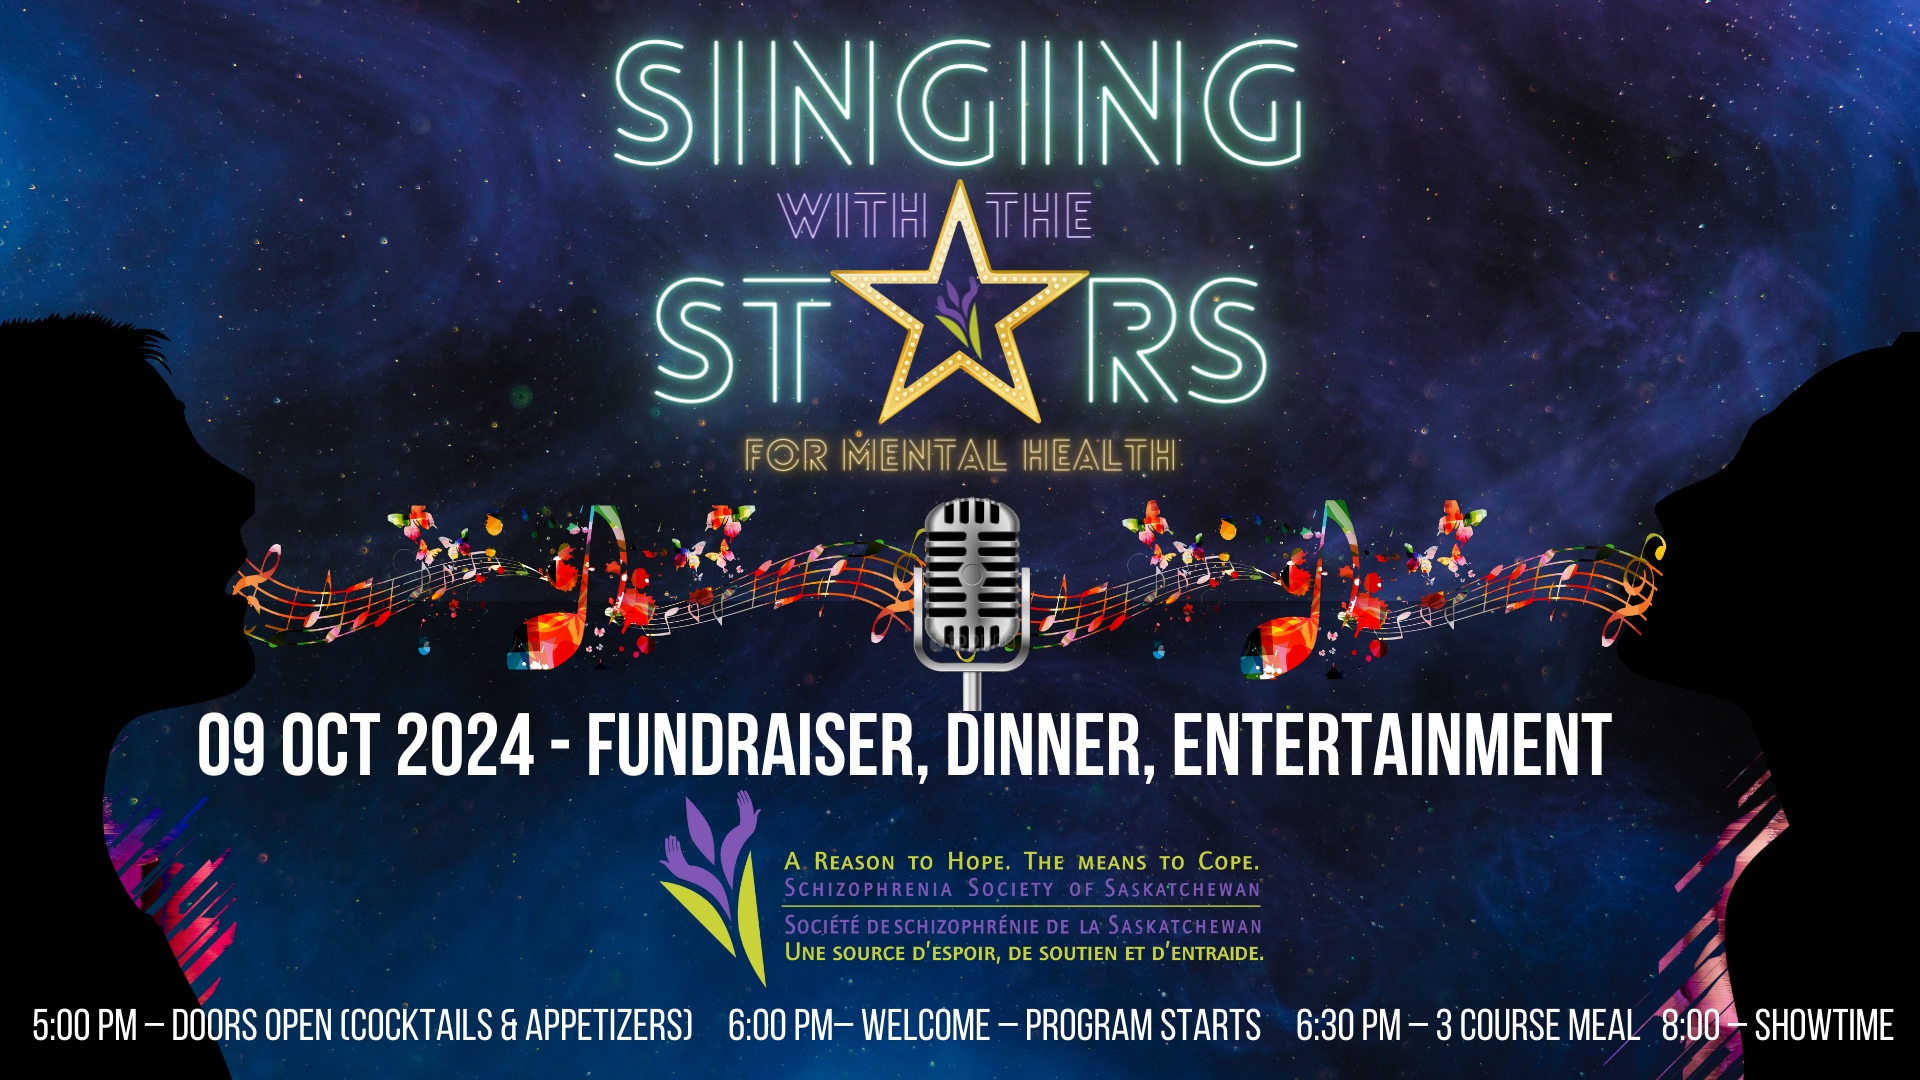 Singing With The Stars For Mental Health - October 9th at TCU Place